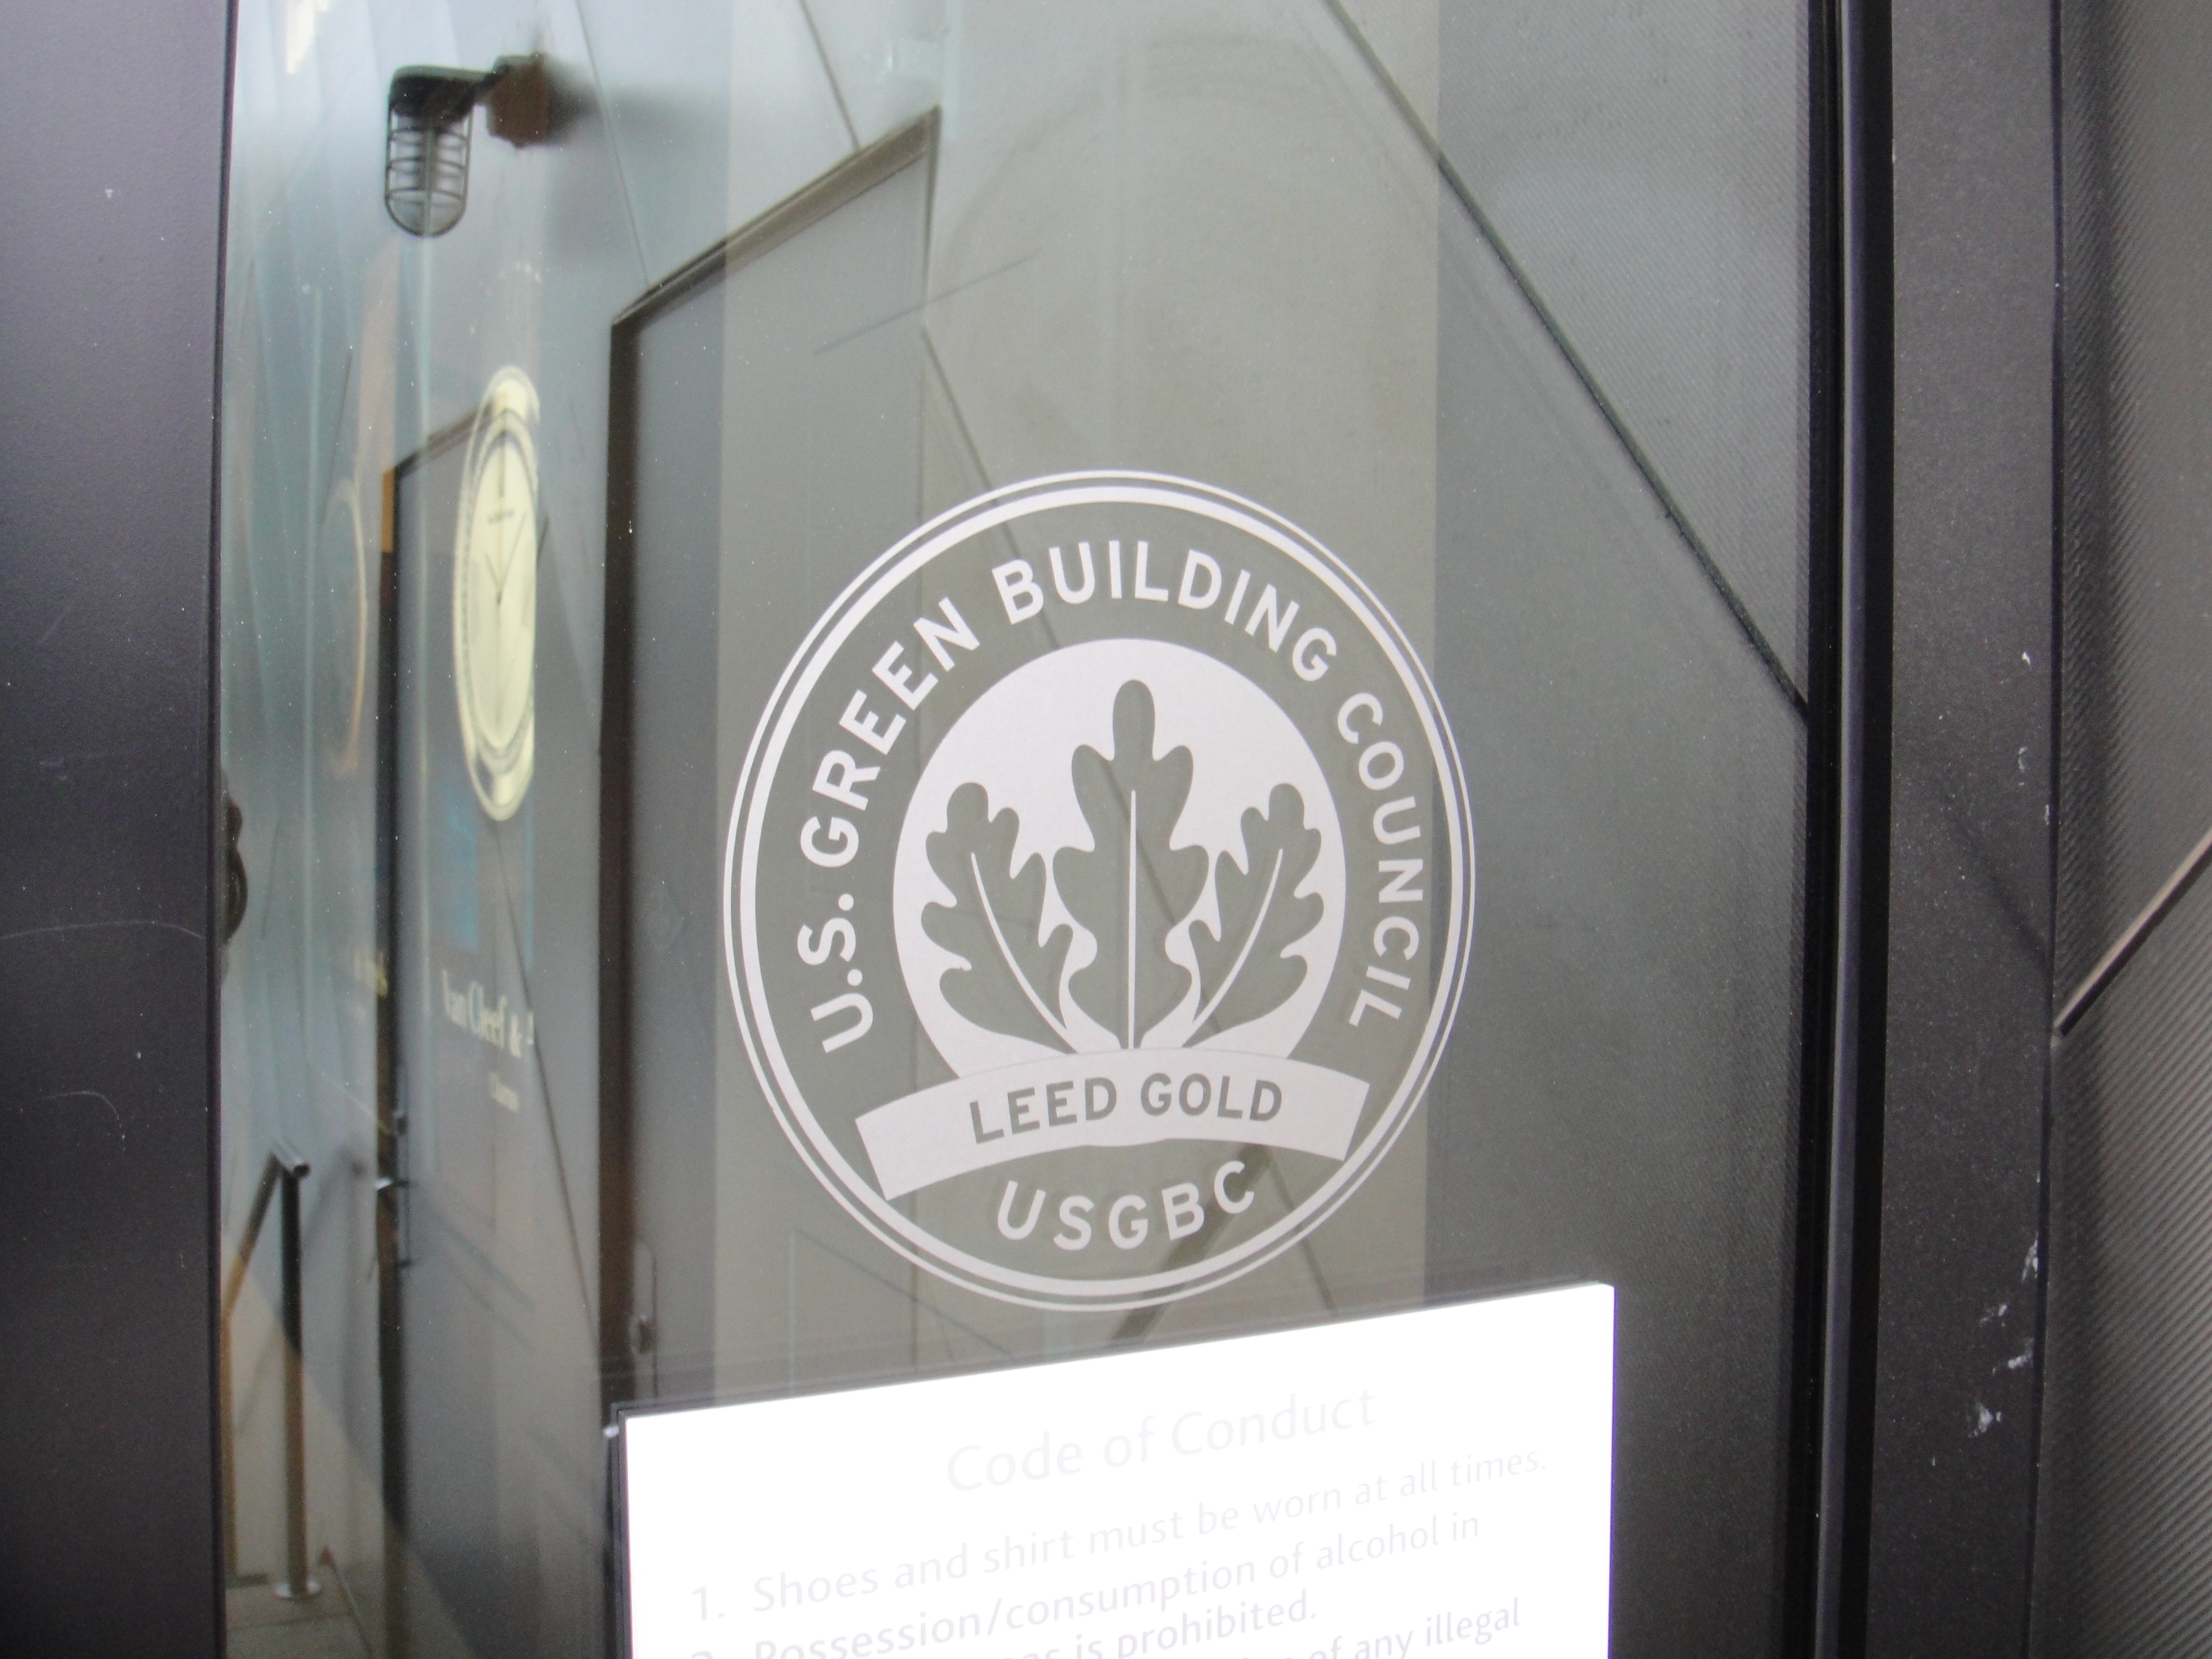 USGBC Working Group approves new guidance for LEED Materials & Resources Credit 4